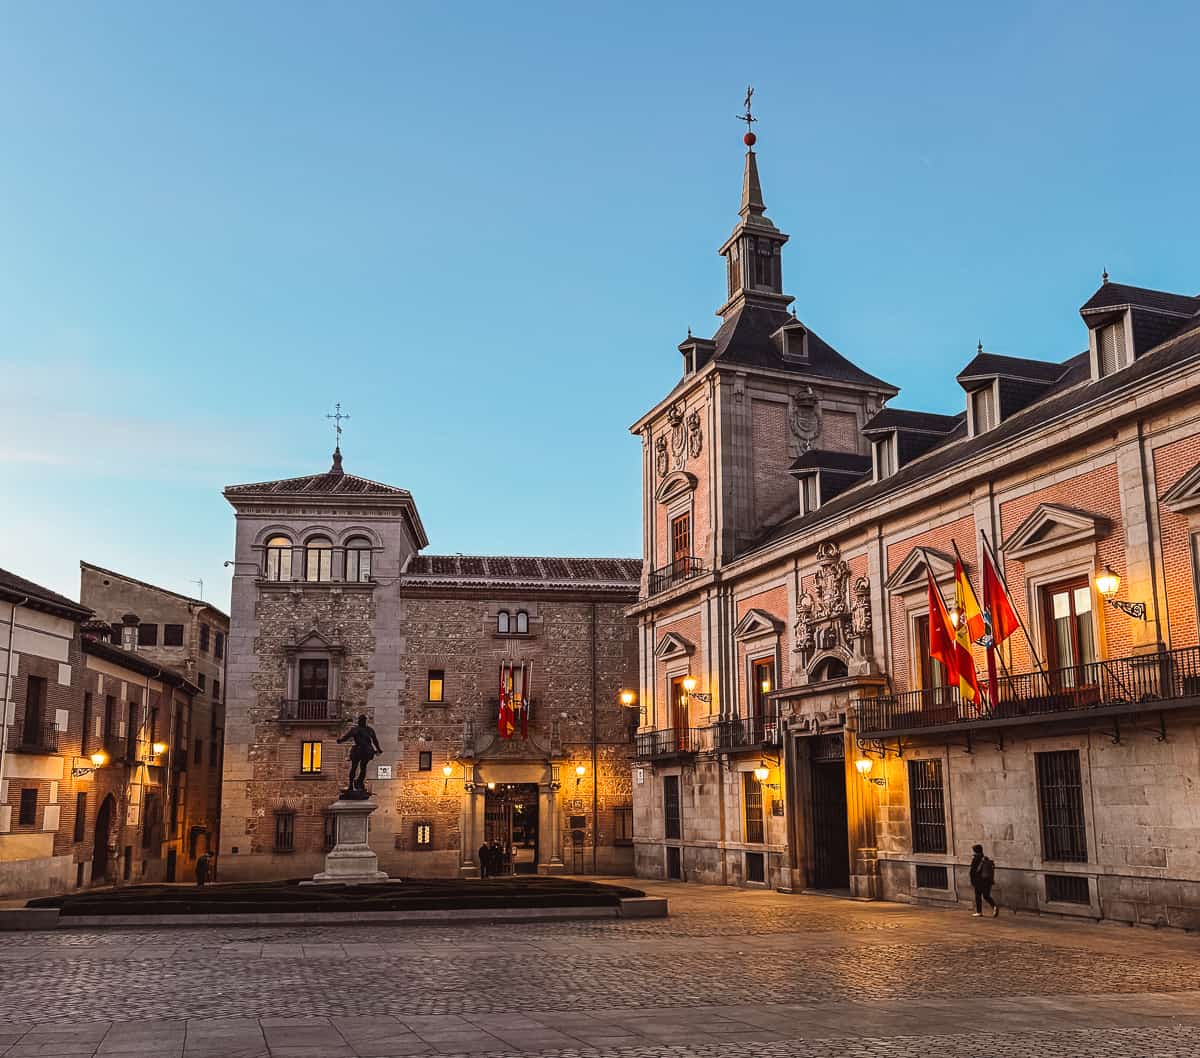 Twilight over Plaza de la Villa, one of the hidden gems in Madrid, featuring historic buildings adorned with Spanish flags under a clear sky.